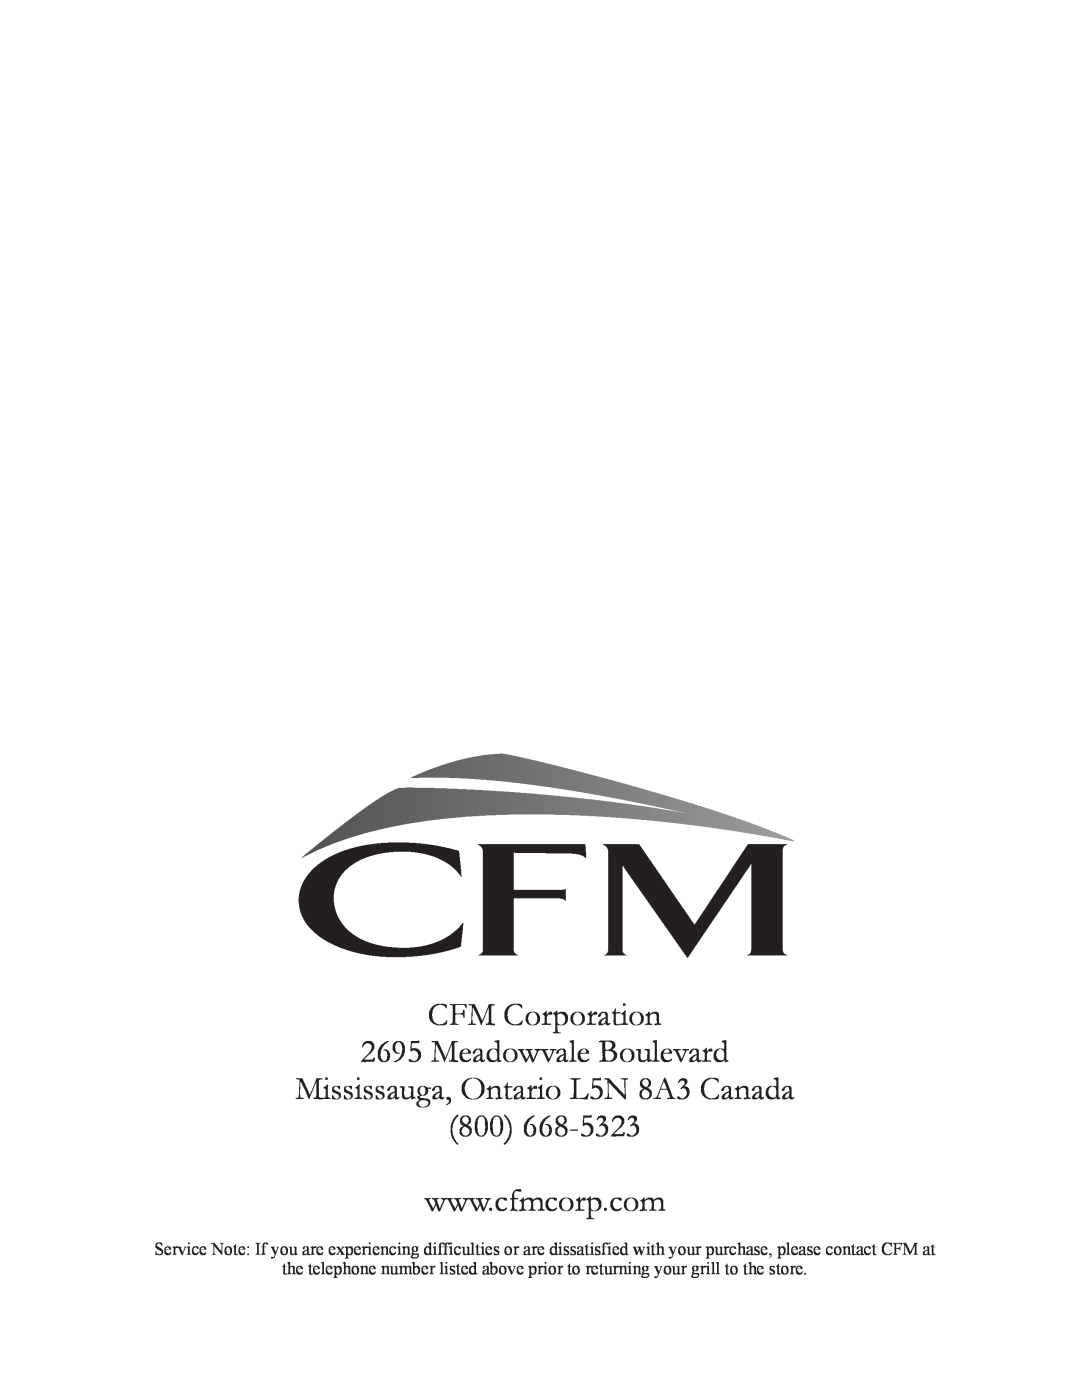 Vermont Casting WOOD STOVE owner manual CFM Corporation 2695 Meadowvale Boulevard, Mississauga, Ontario L5N 8A3 Canada 